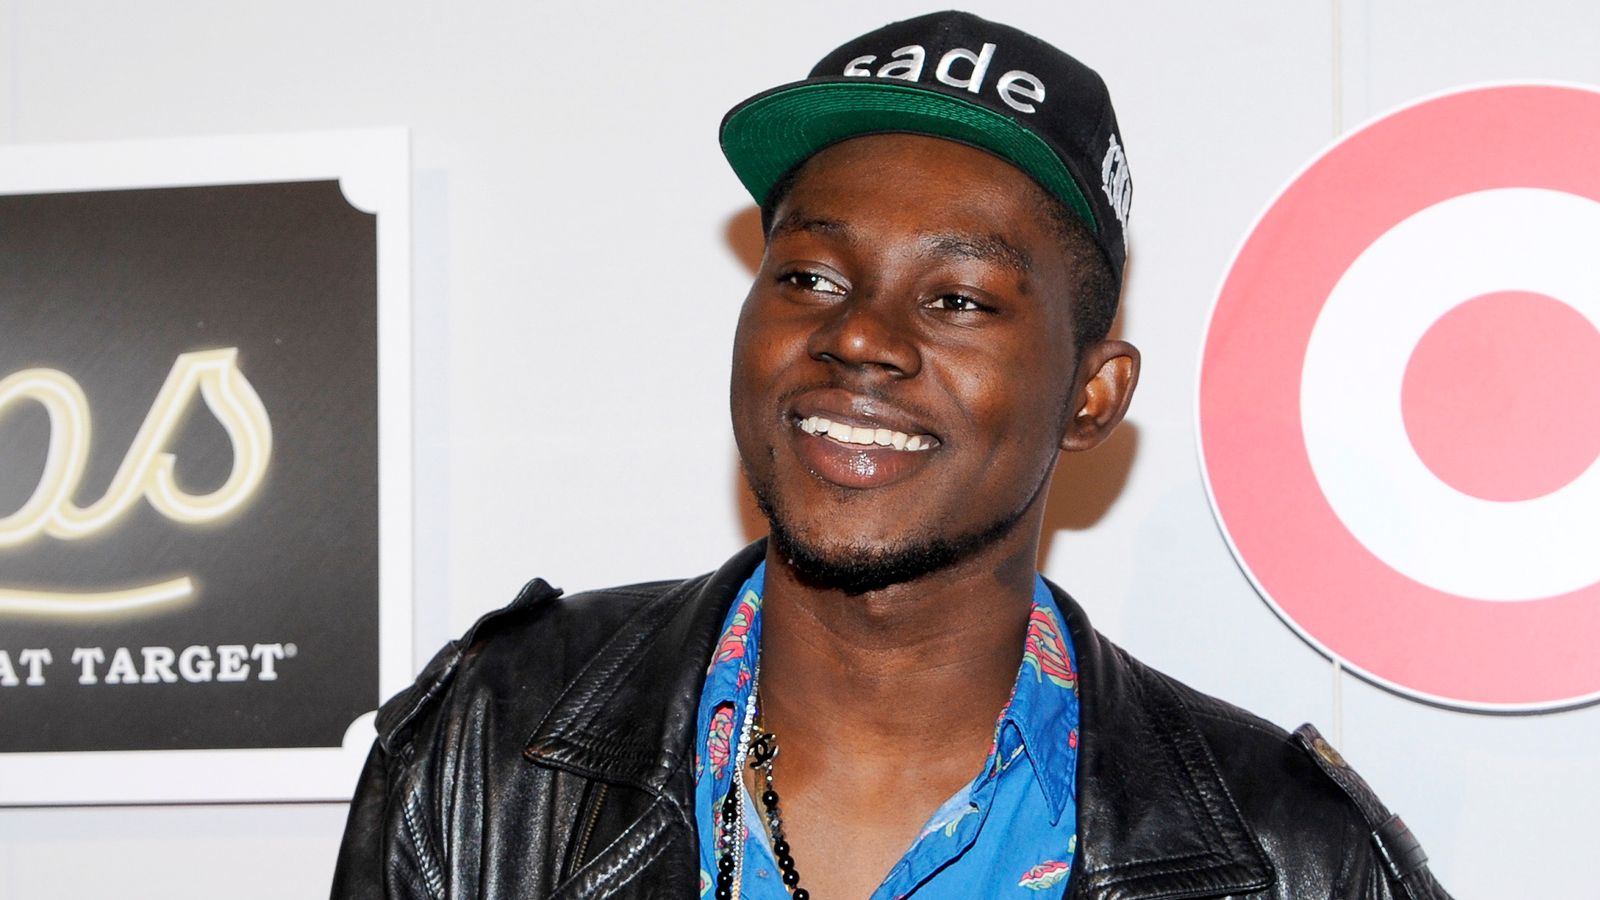 Rapper Theophilus London found safe after going missing  for 'months', family says